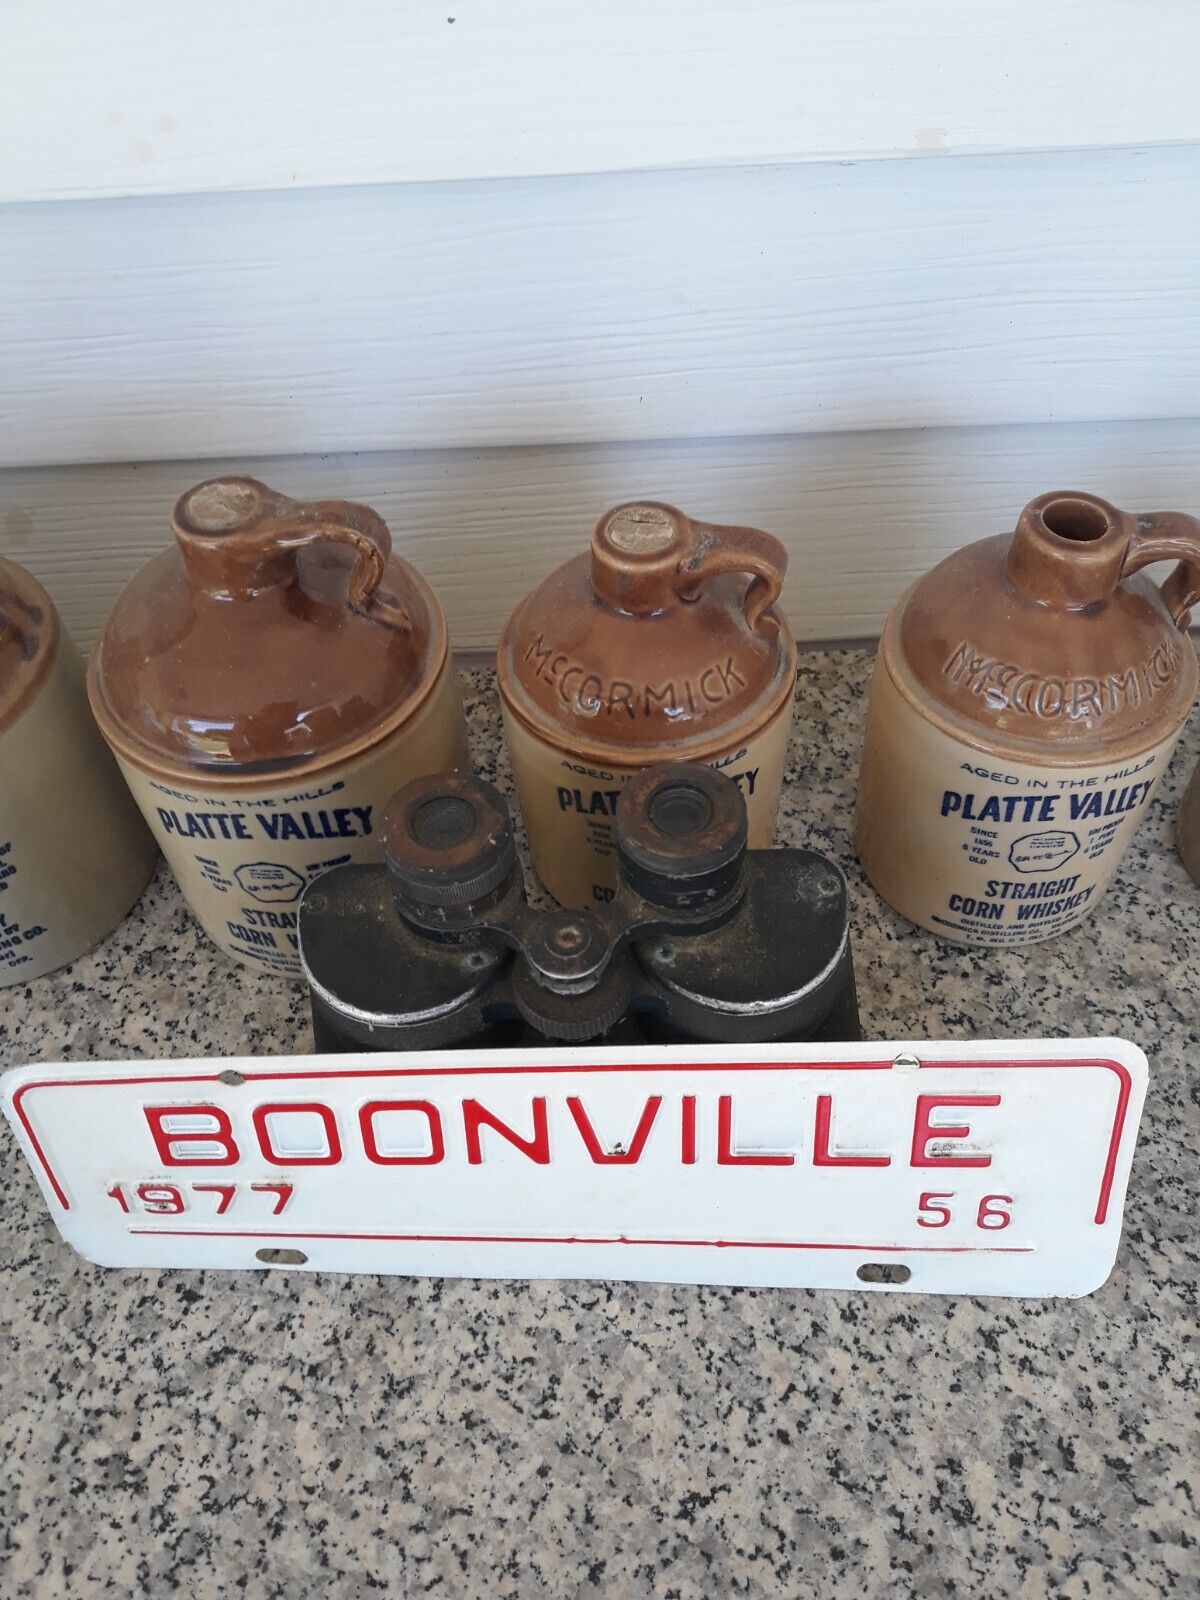 1977 BOONVILLE NC CITY LICENSE PLATE TAG (never been used)